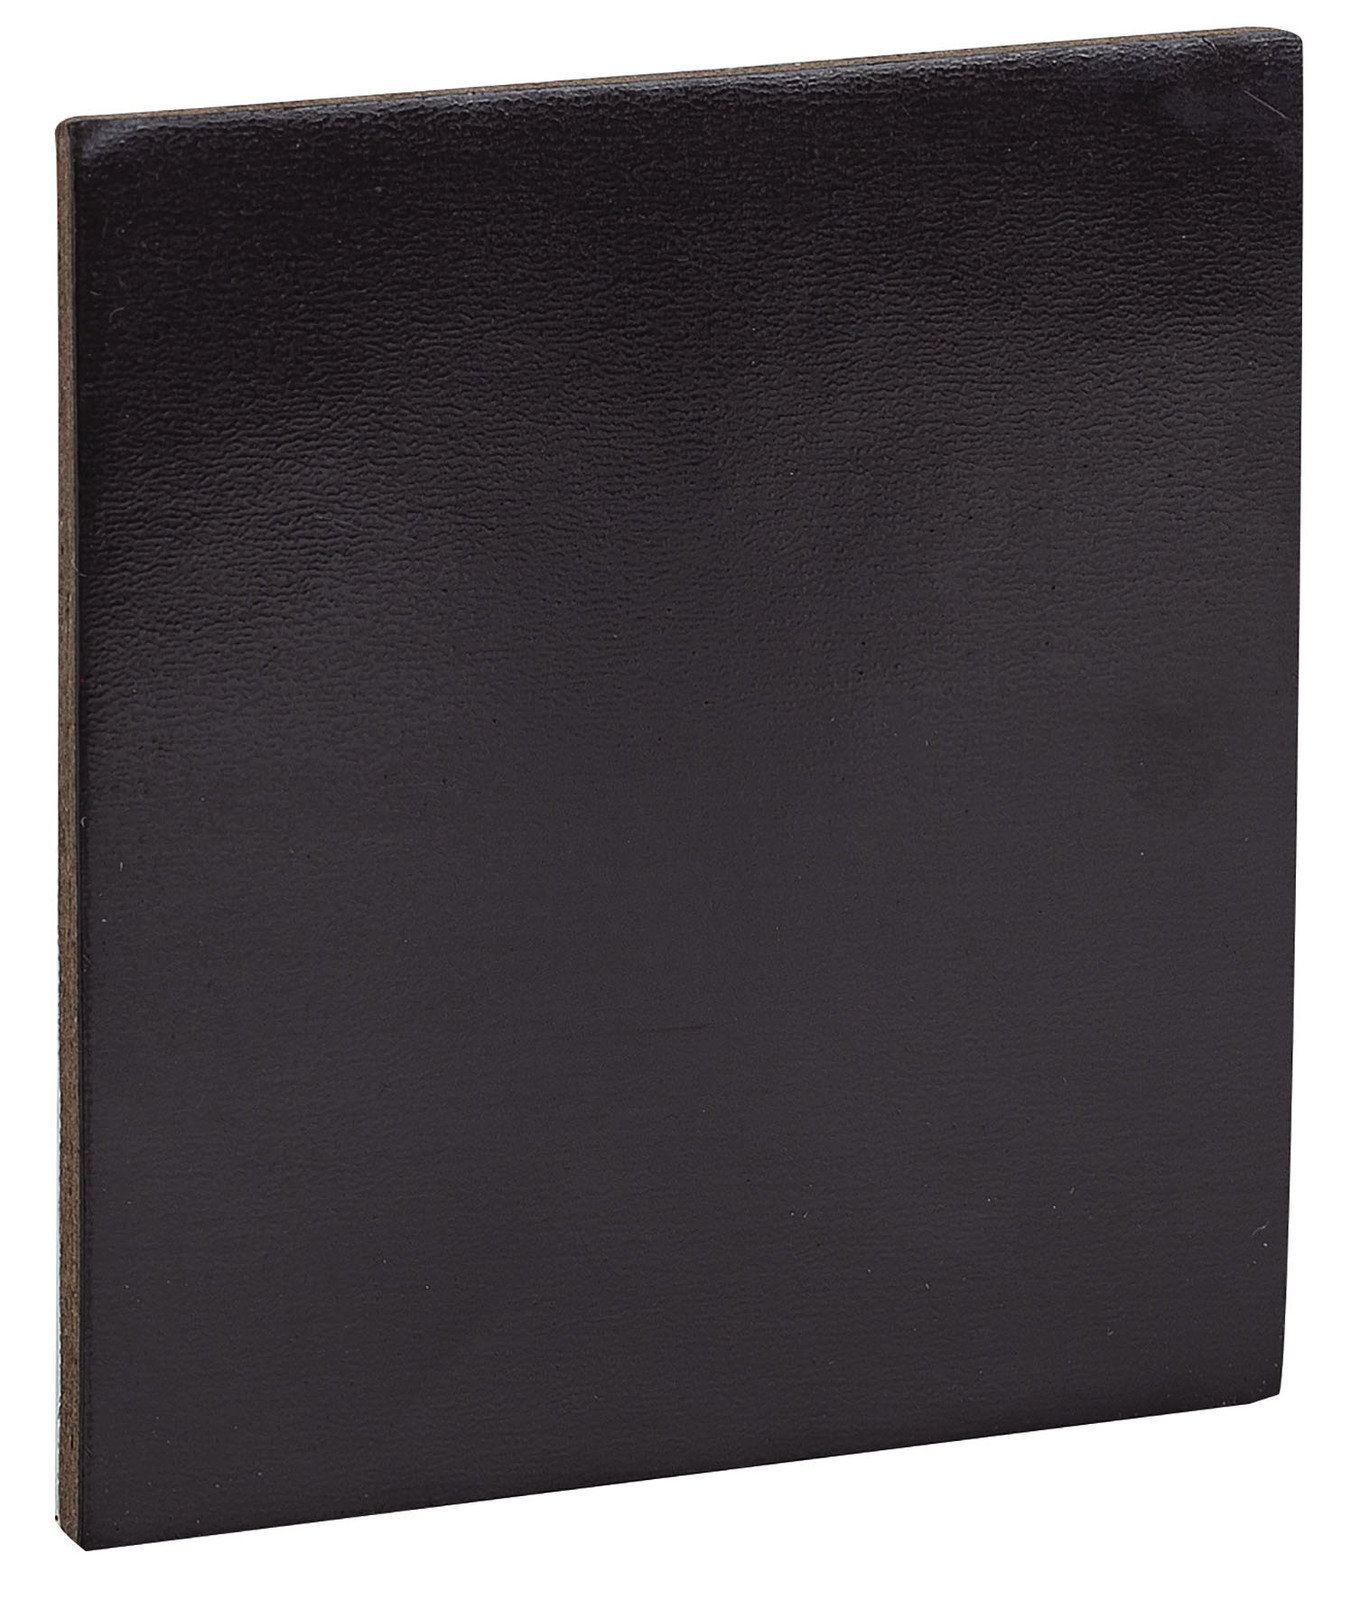 Ultra-Mini Magnetic Square Paintable Canvas